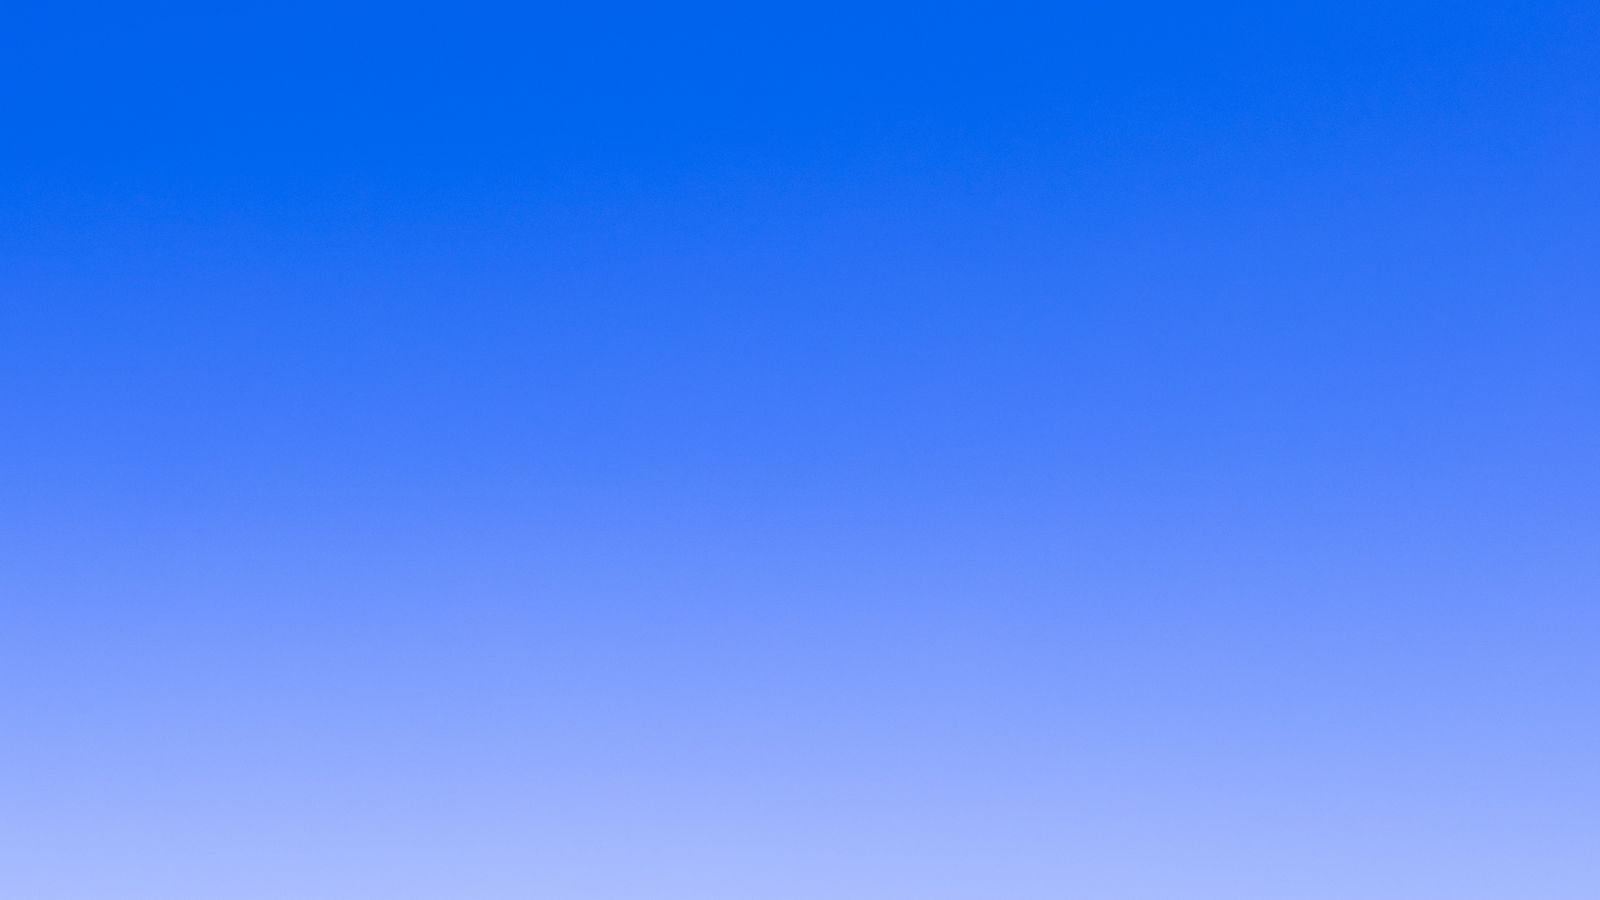 Download wallpaper 1600x900 sky, blue, color, background widescreen 16:9 hd  background